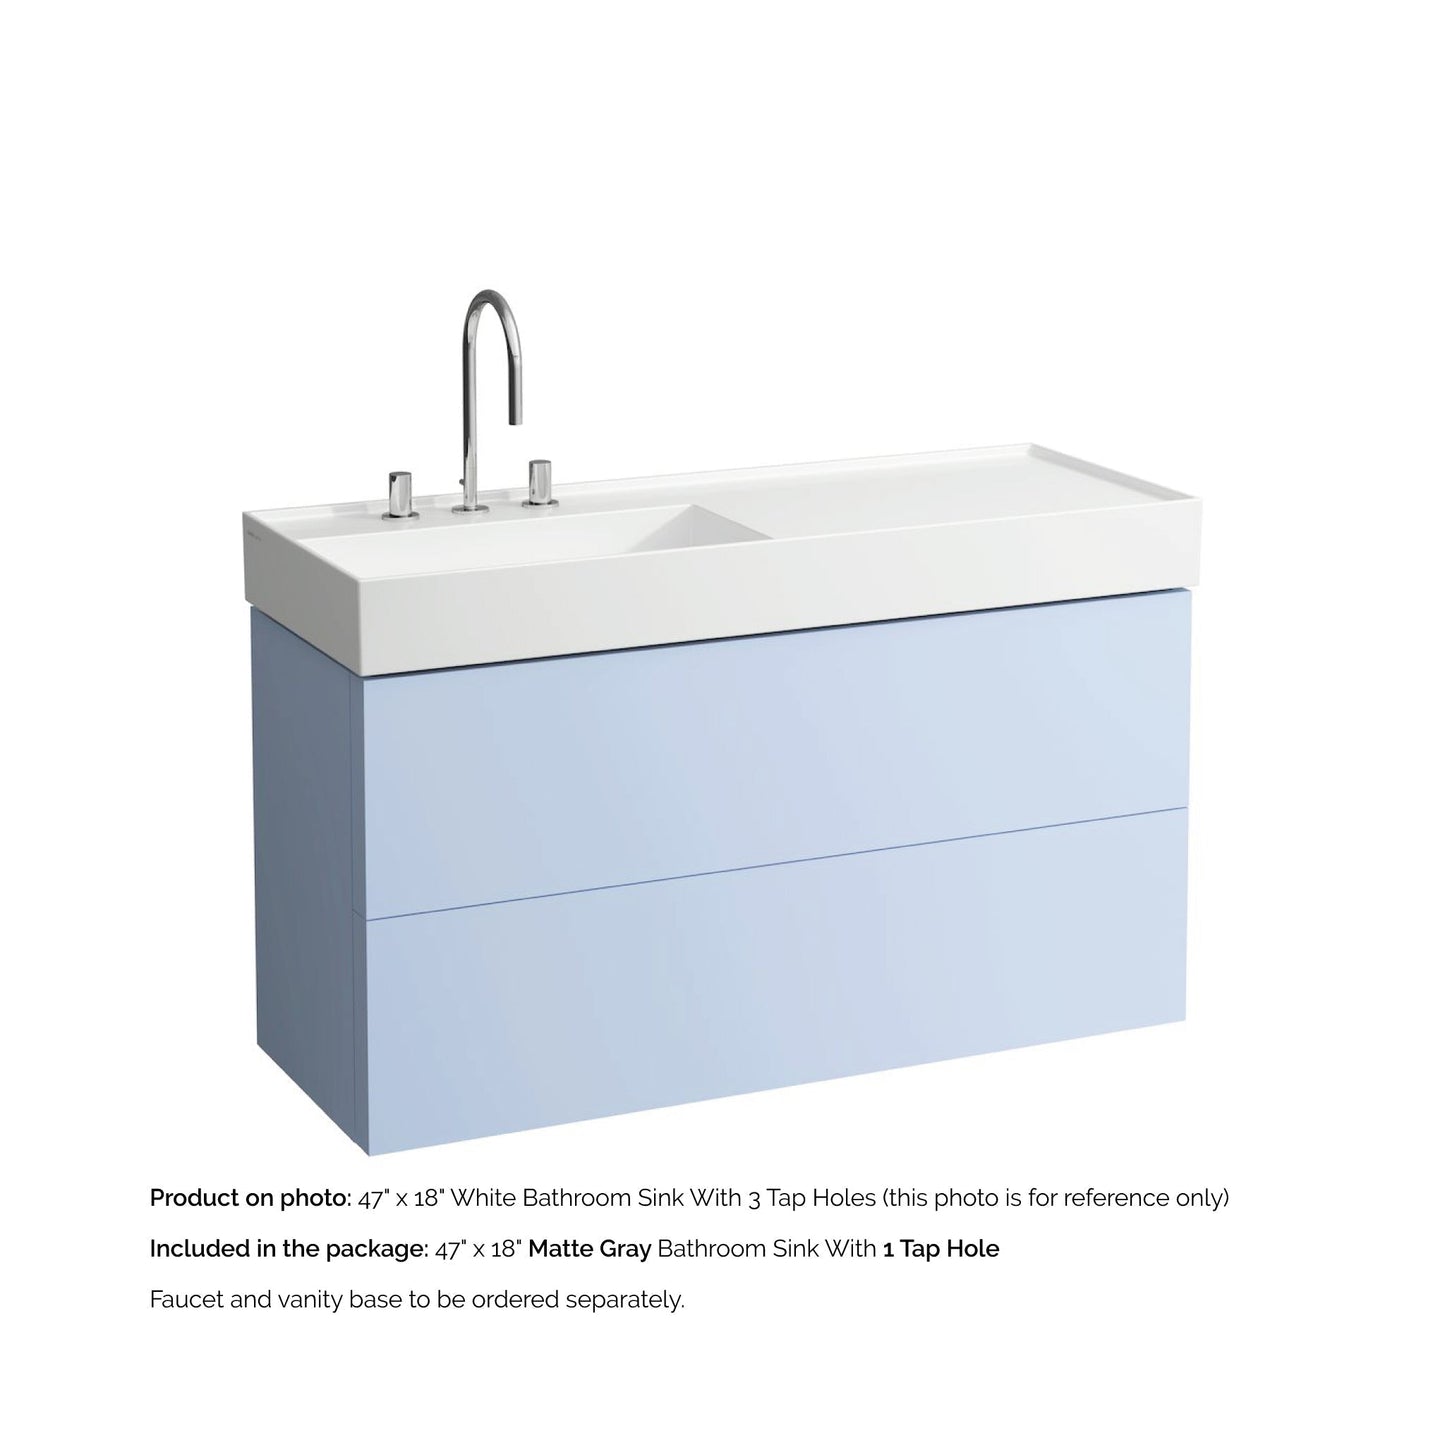 Laufen Kartell 47" x 18" Matte Gray Wall-Mounted Shelf-Right Bathroom Sink With Faucet Hole